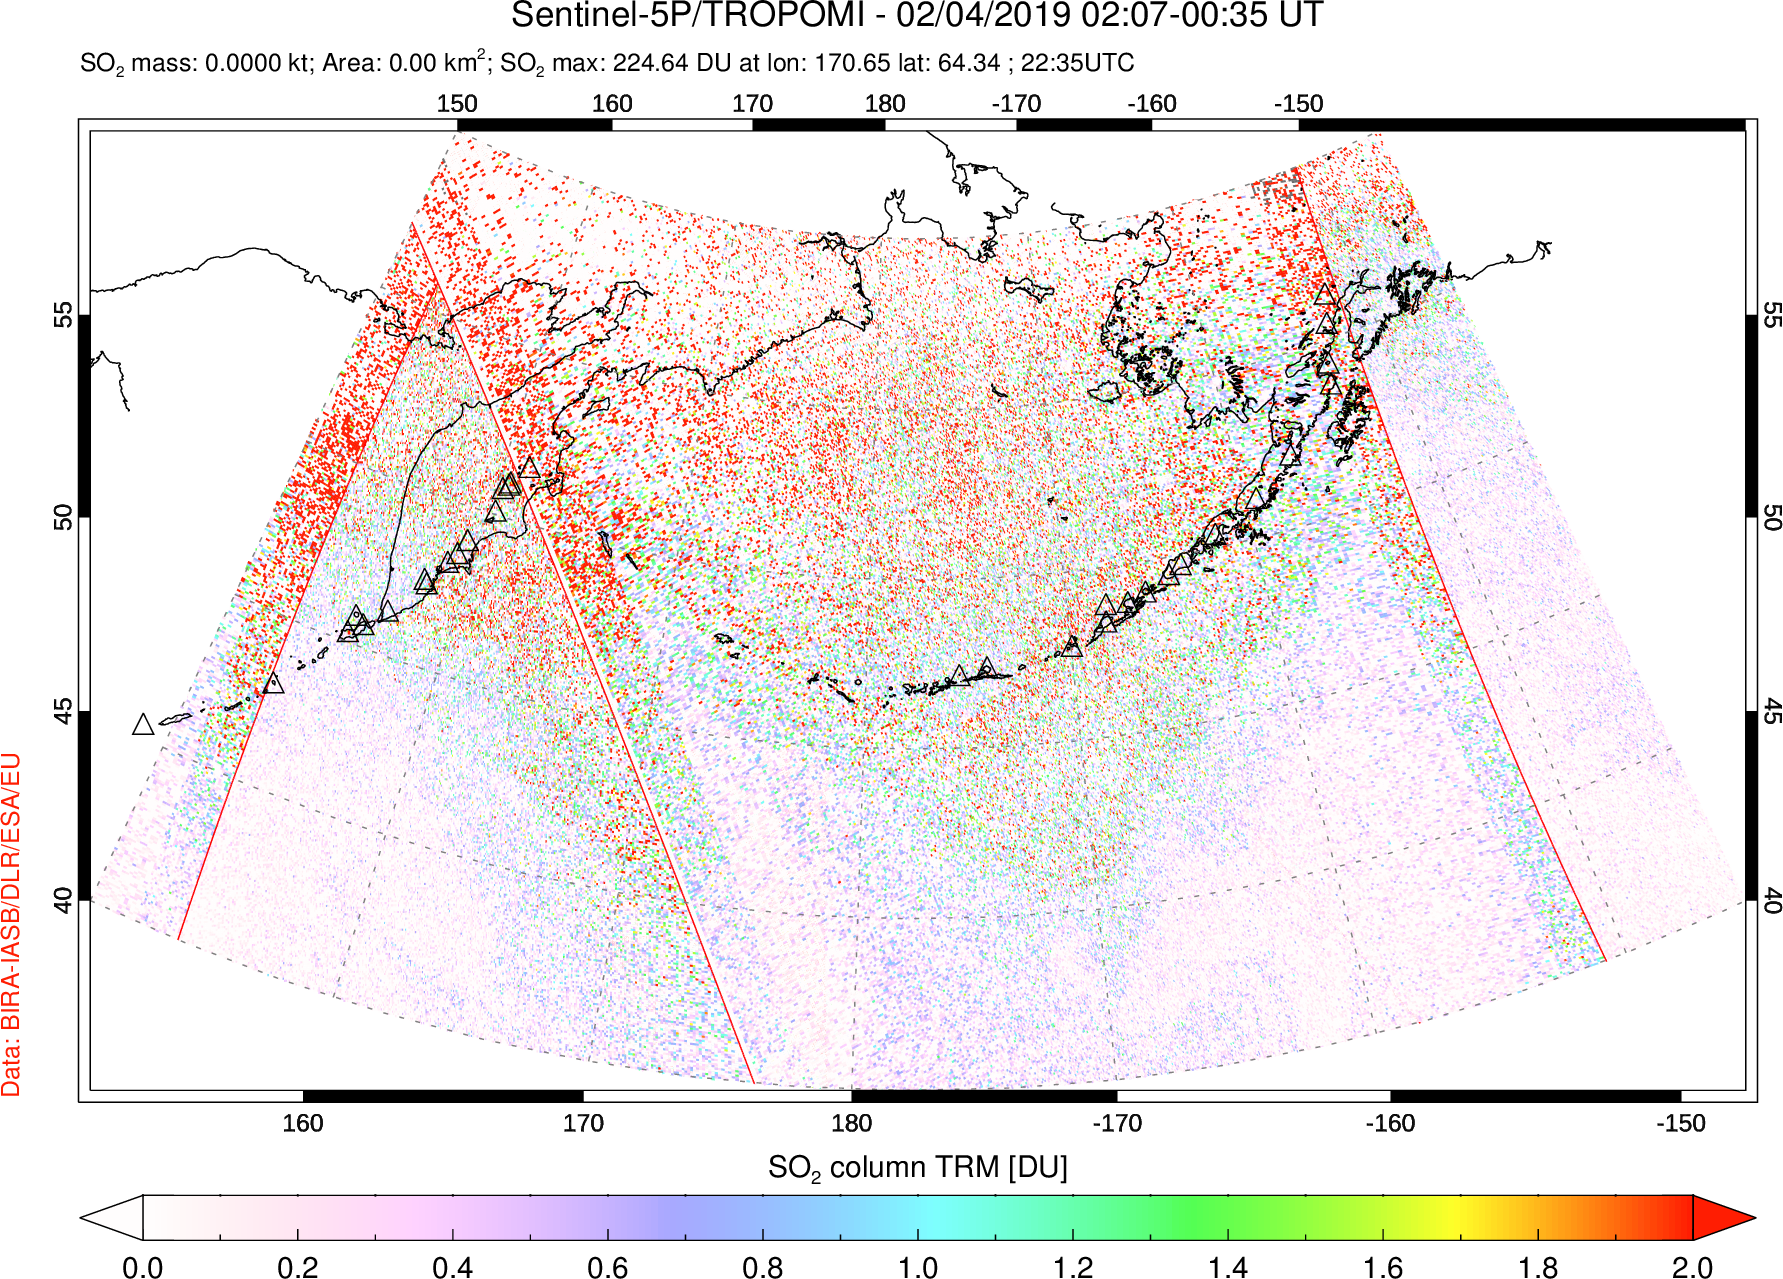 A sulfur dioxide image over North Pacific on Feb 04, 2019.